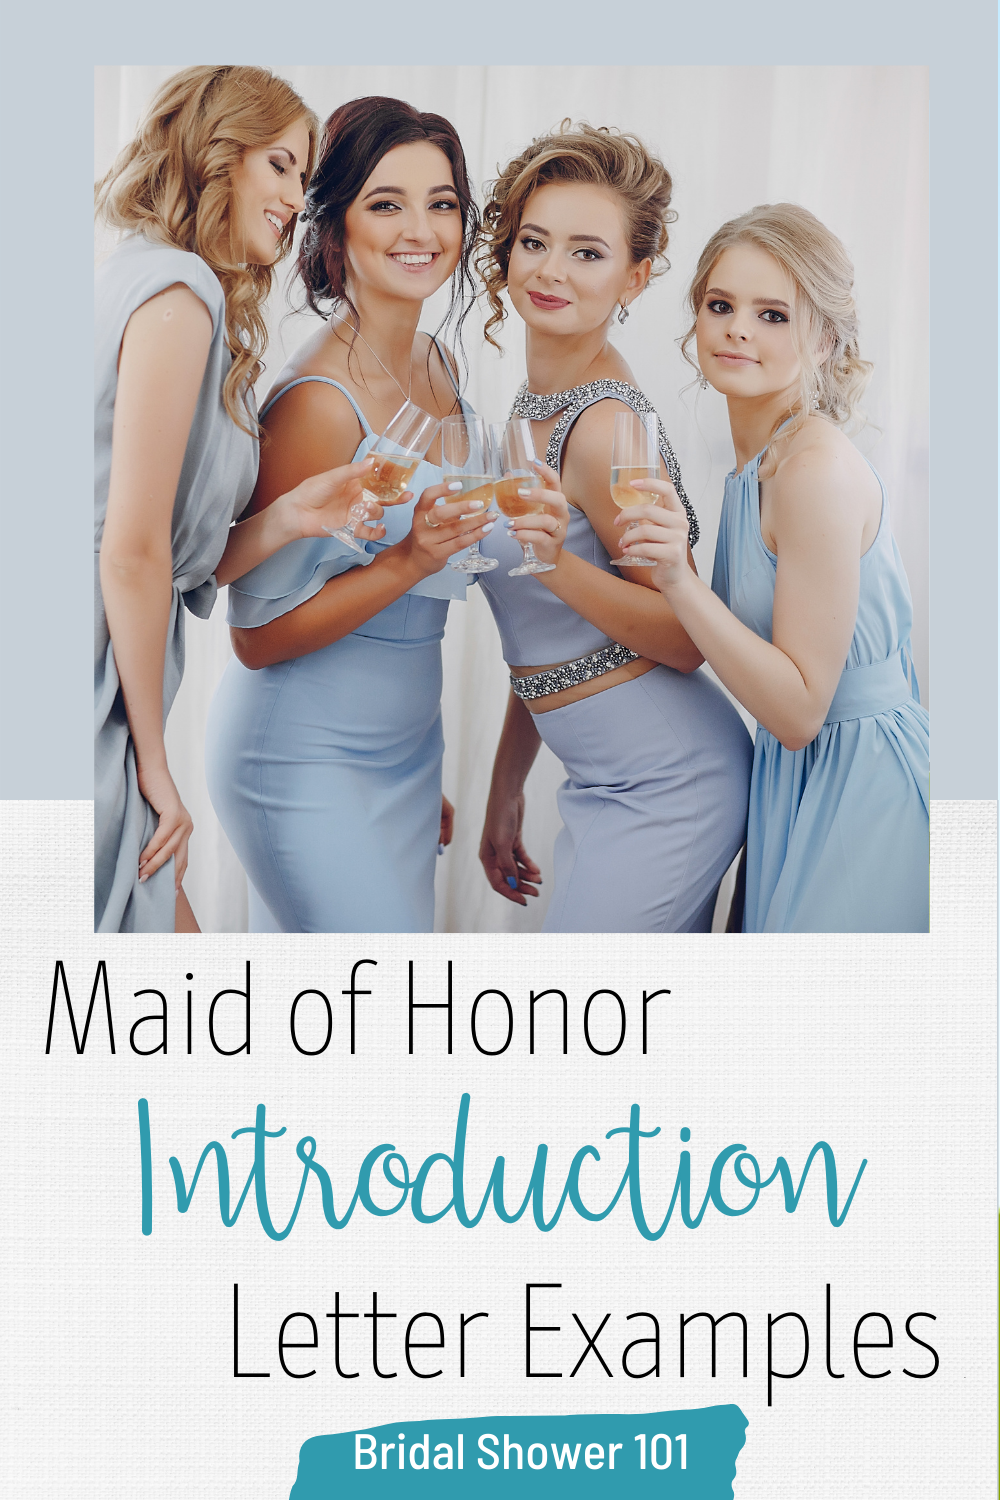 maid-of-honor-introduction-letter-to-bridesmaids-bridal-shower-101